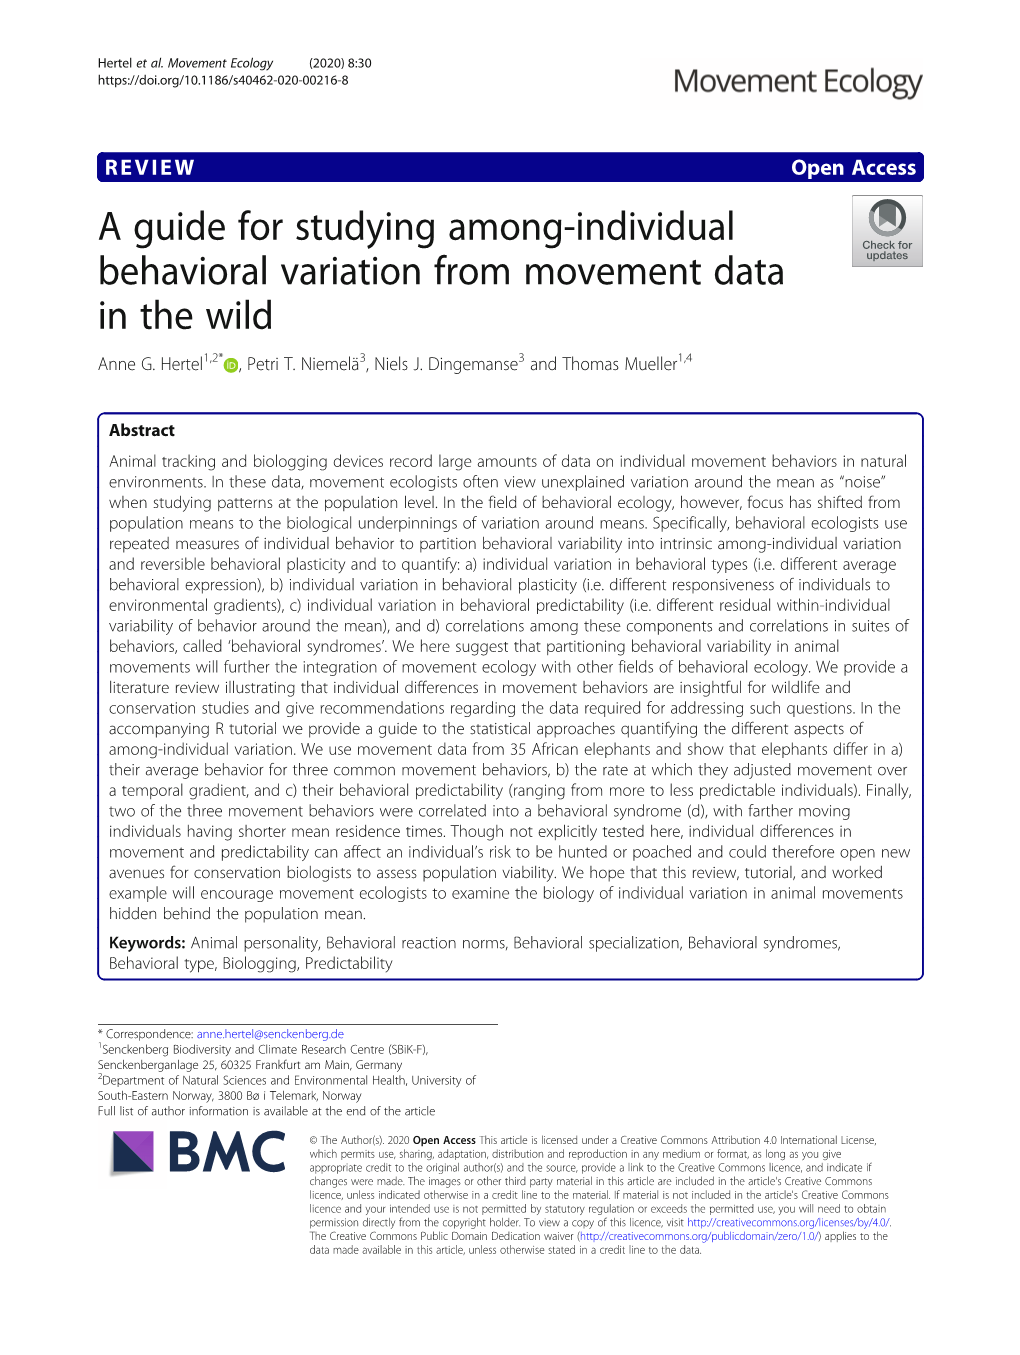 A Guide for Studying Among-Individual Behavioral Variation from Movement Data in the Wild Anne G